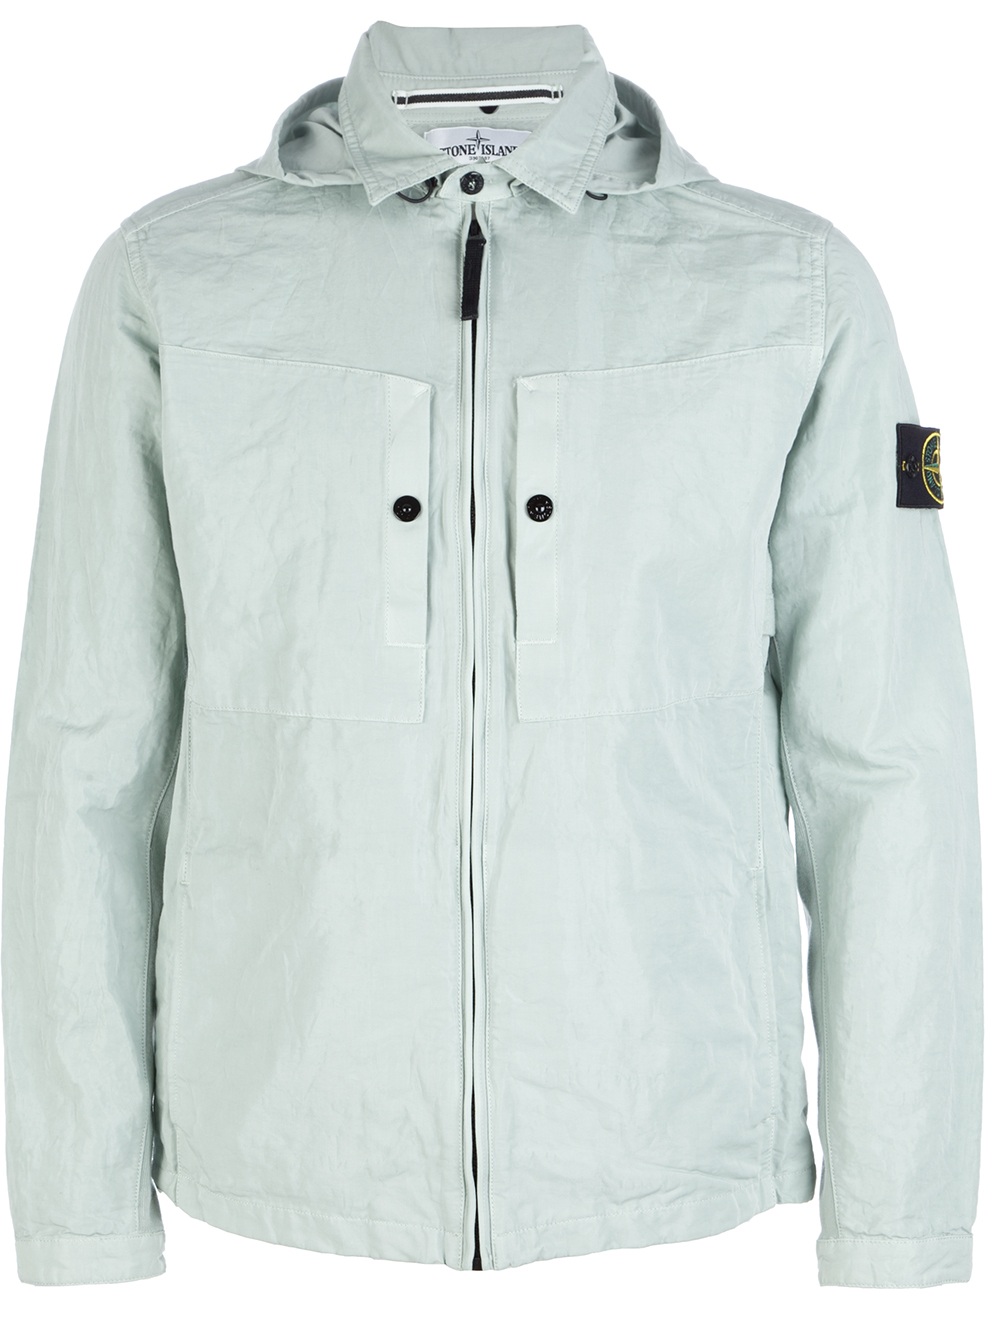 Stone Island Hooded Overshirt in Green for Men - Lyst